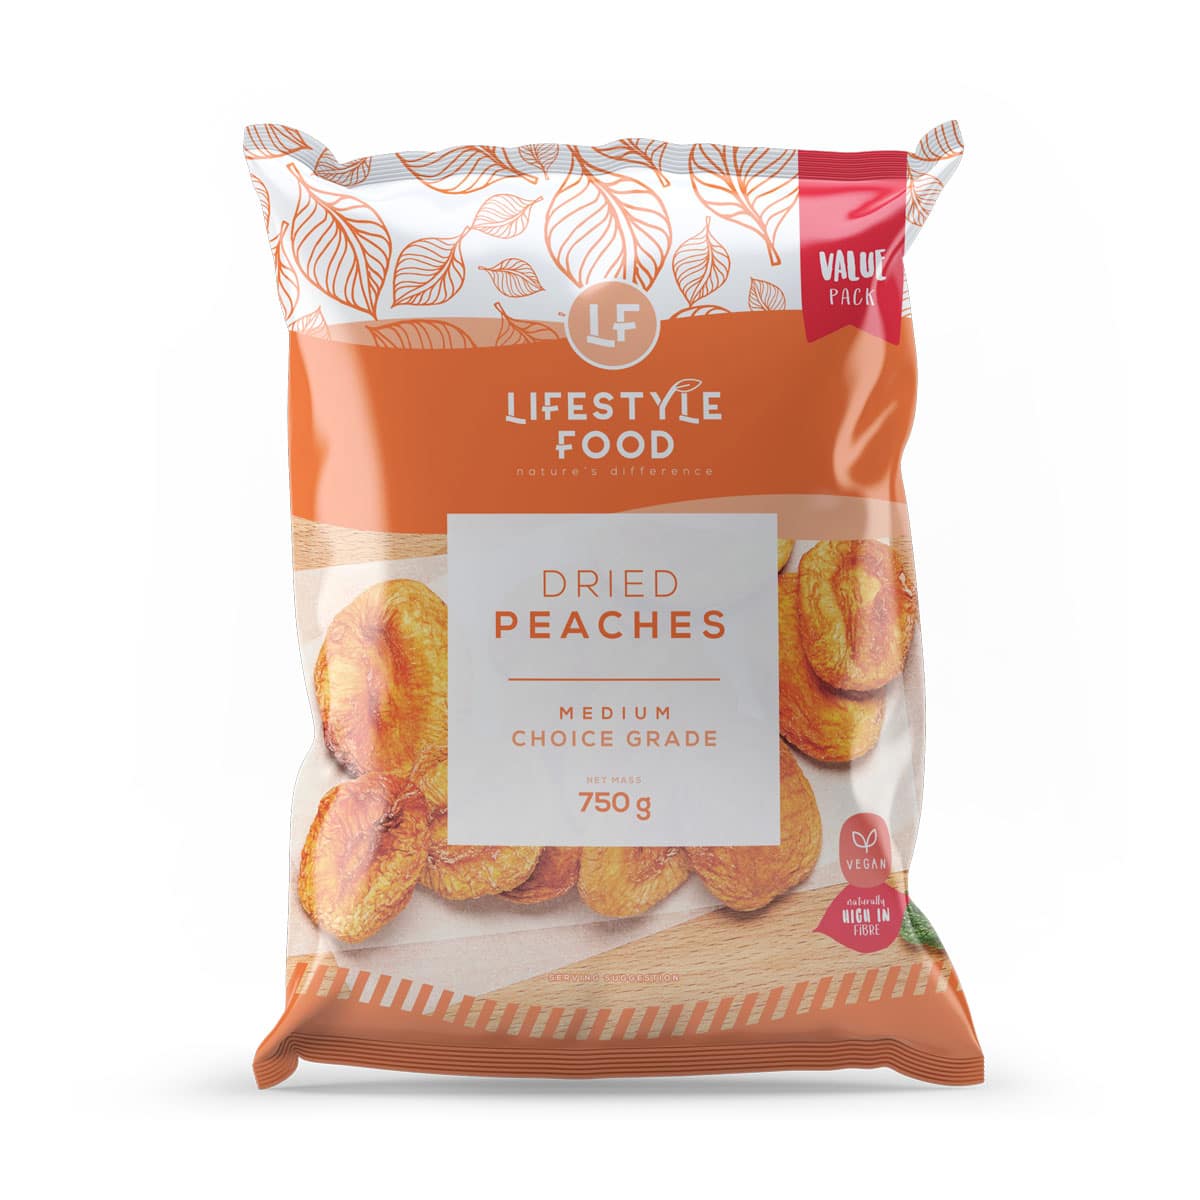 Lifestyle Food Dried Peaches Value Pack - 750g